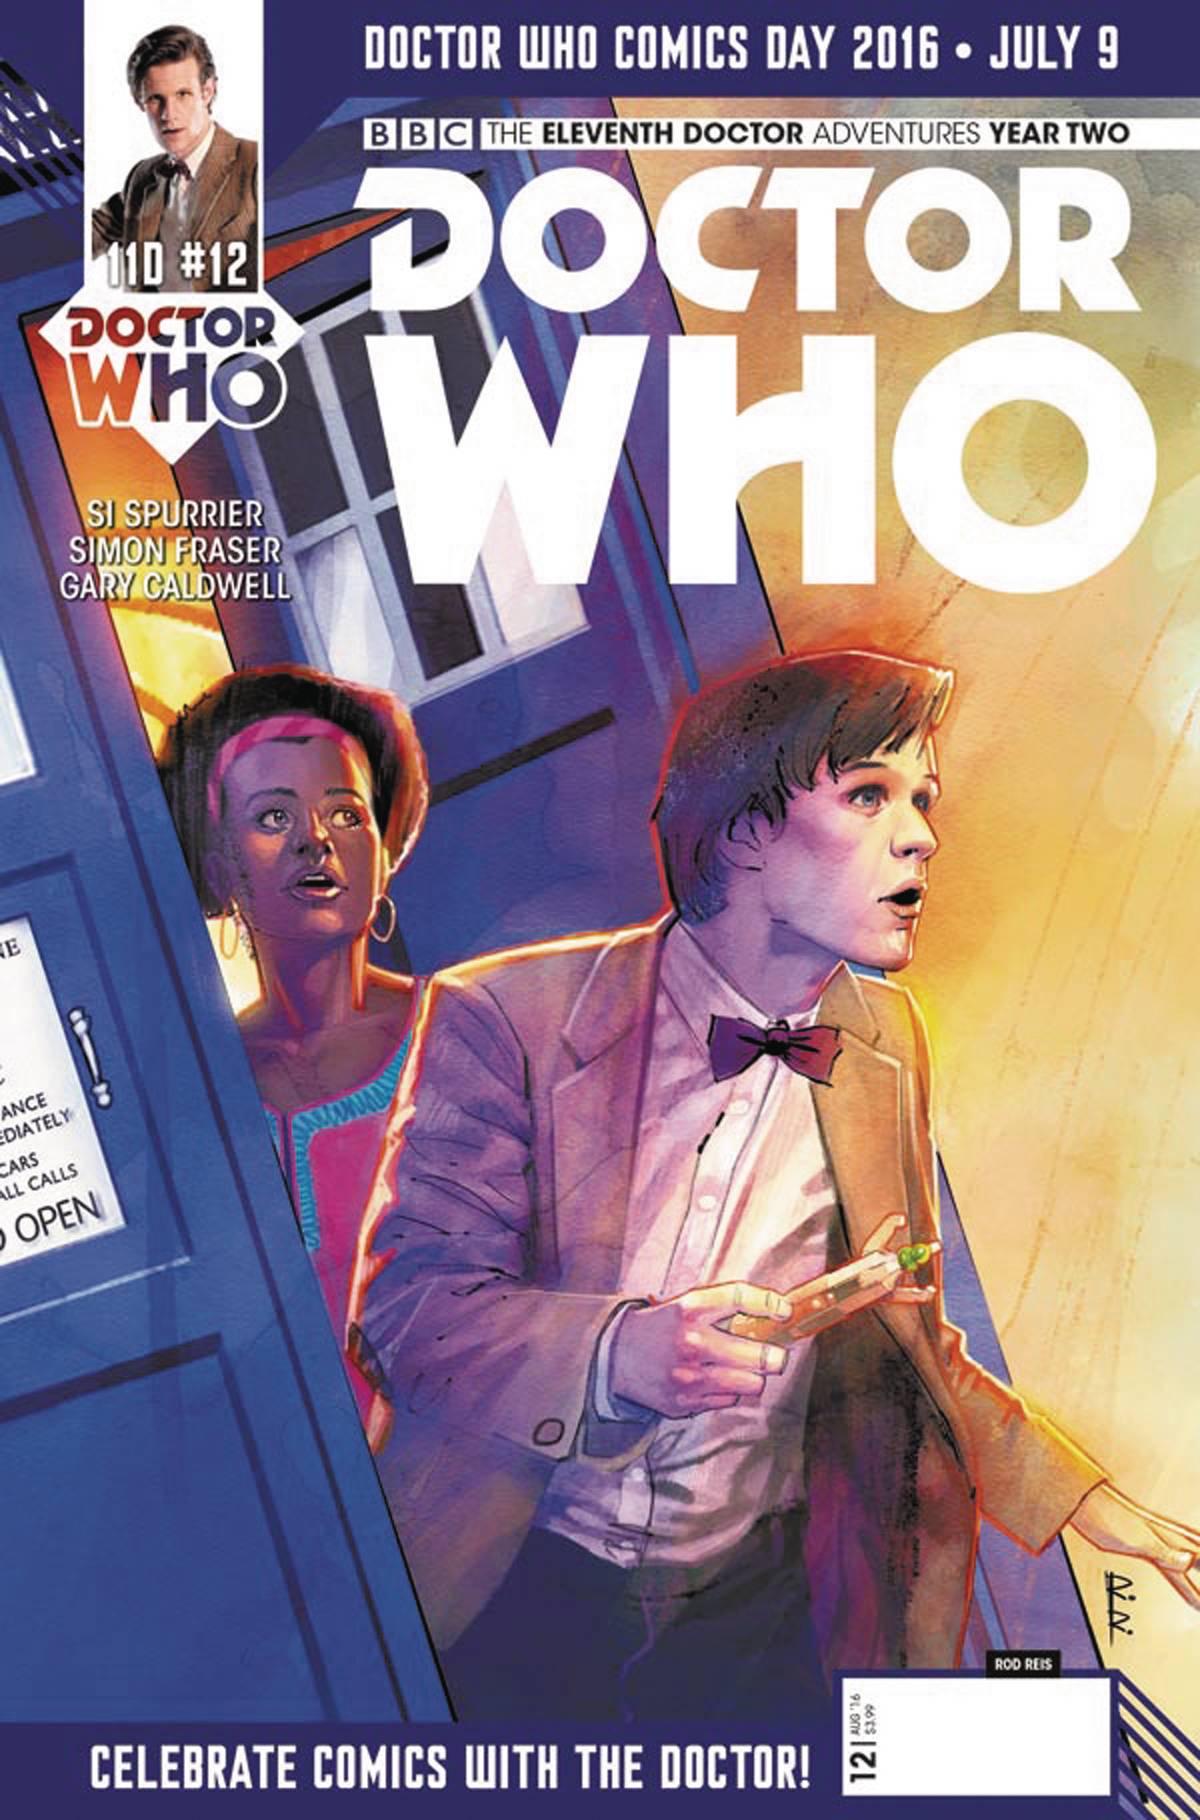 Doctor Who 11th Year Two #12 Cover E Doctor Who Day